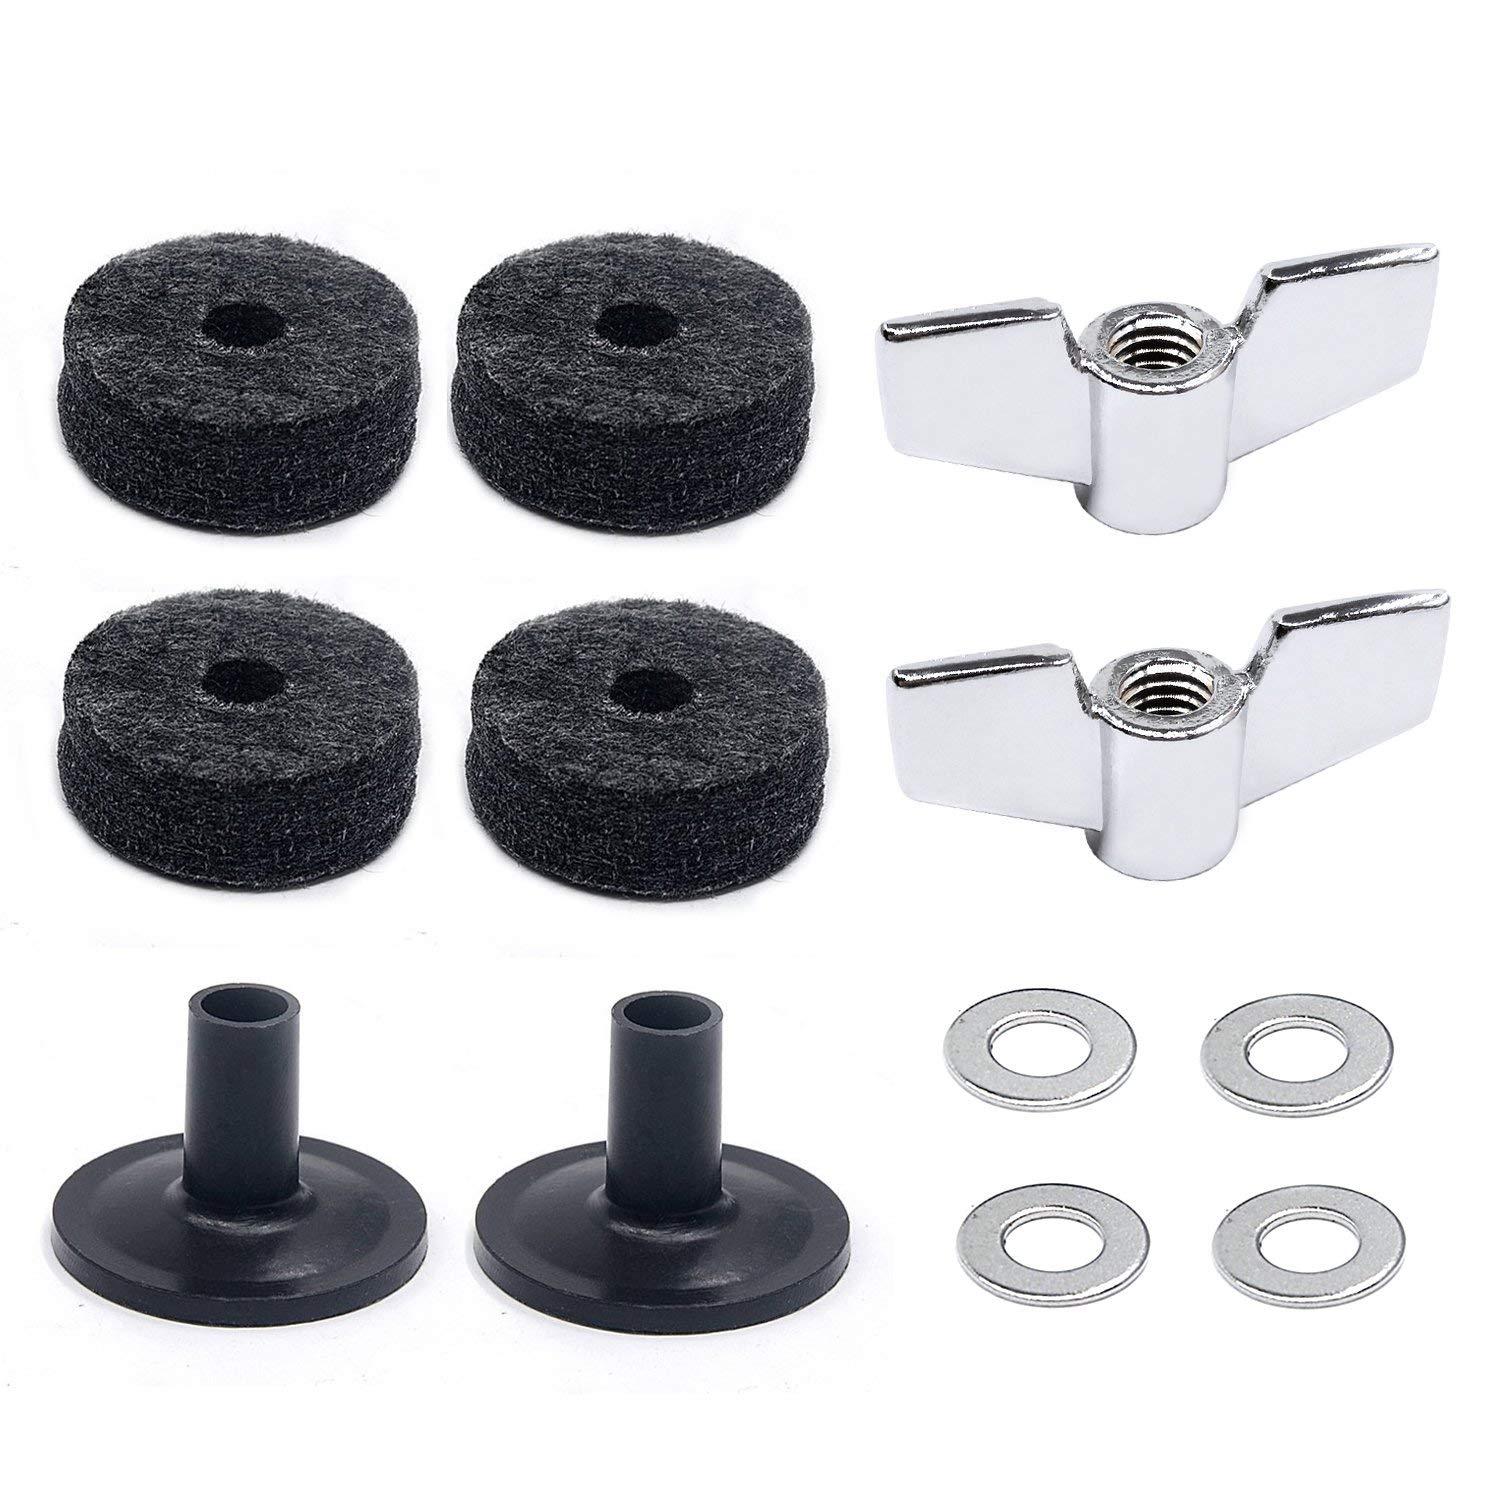 Flameer 10 Pieces Swivel Nuts for Drum Set Kit Parts 